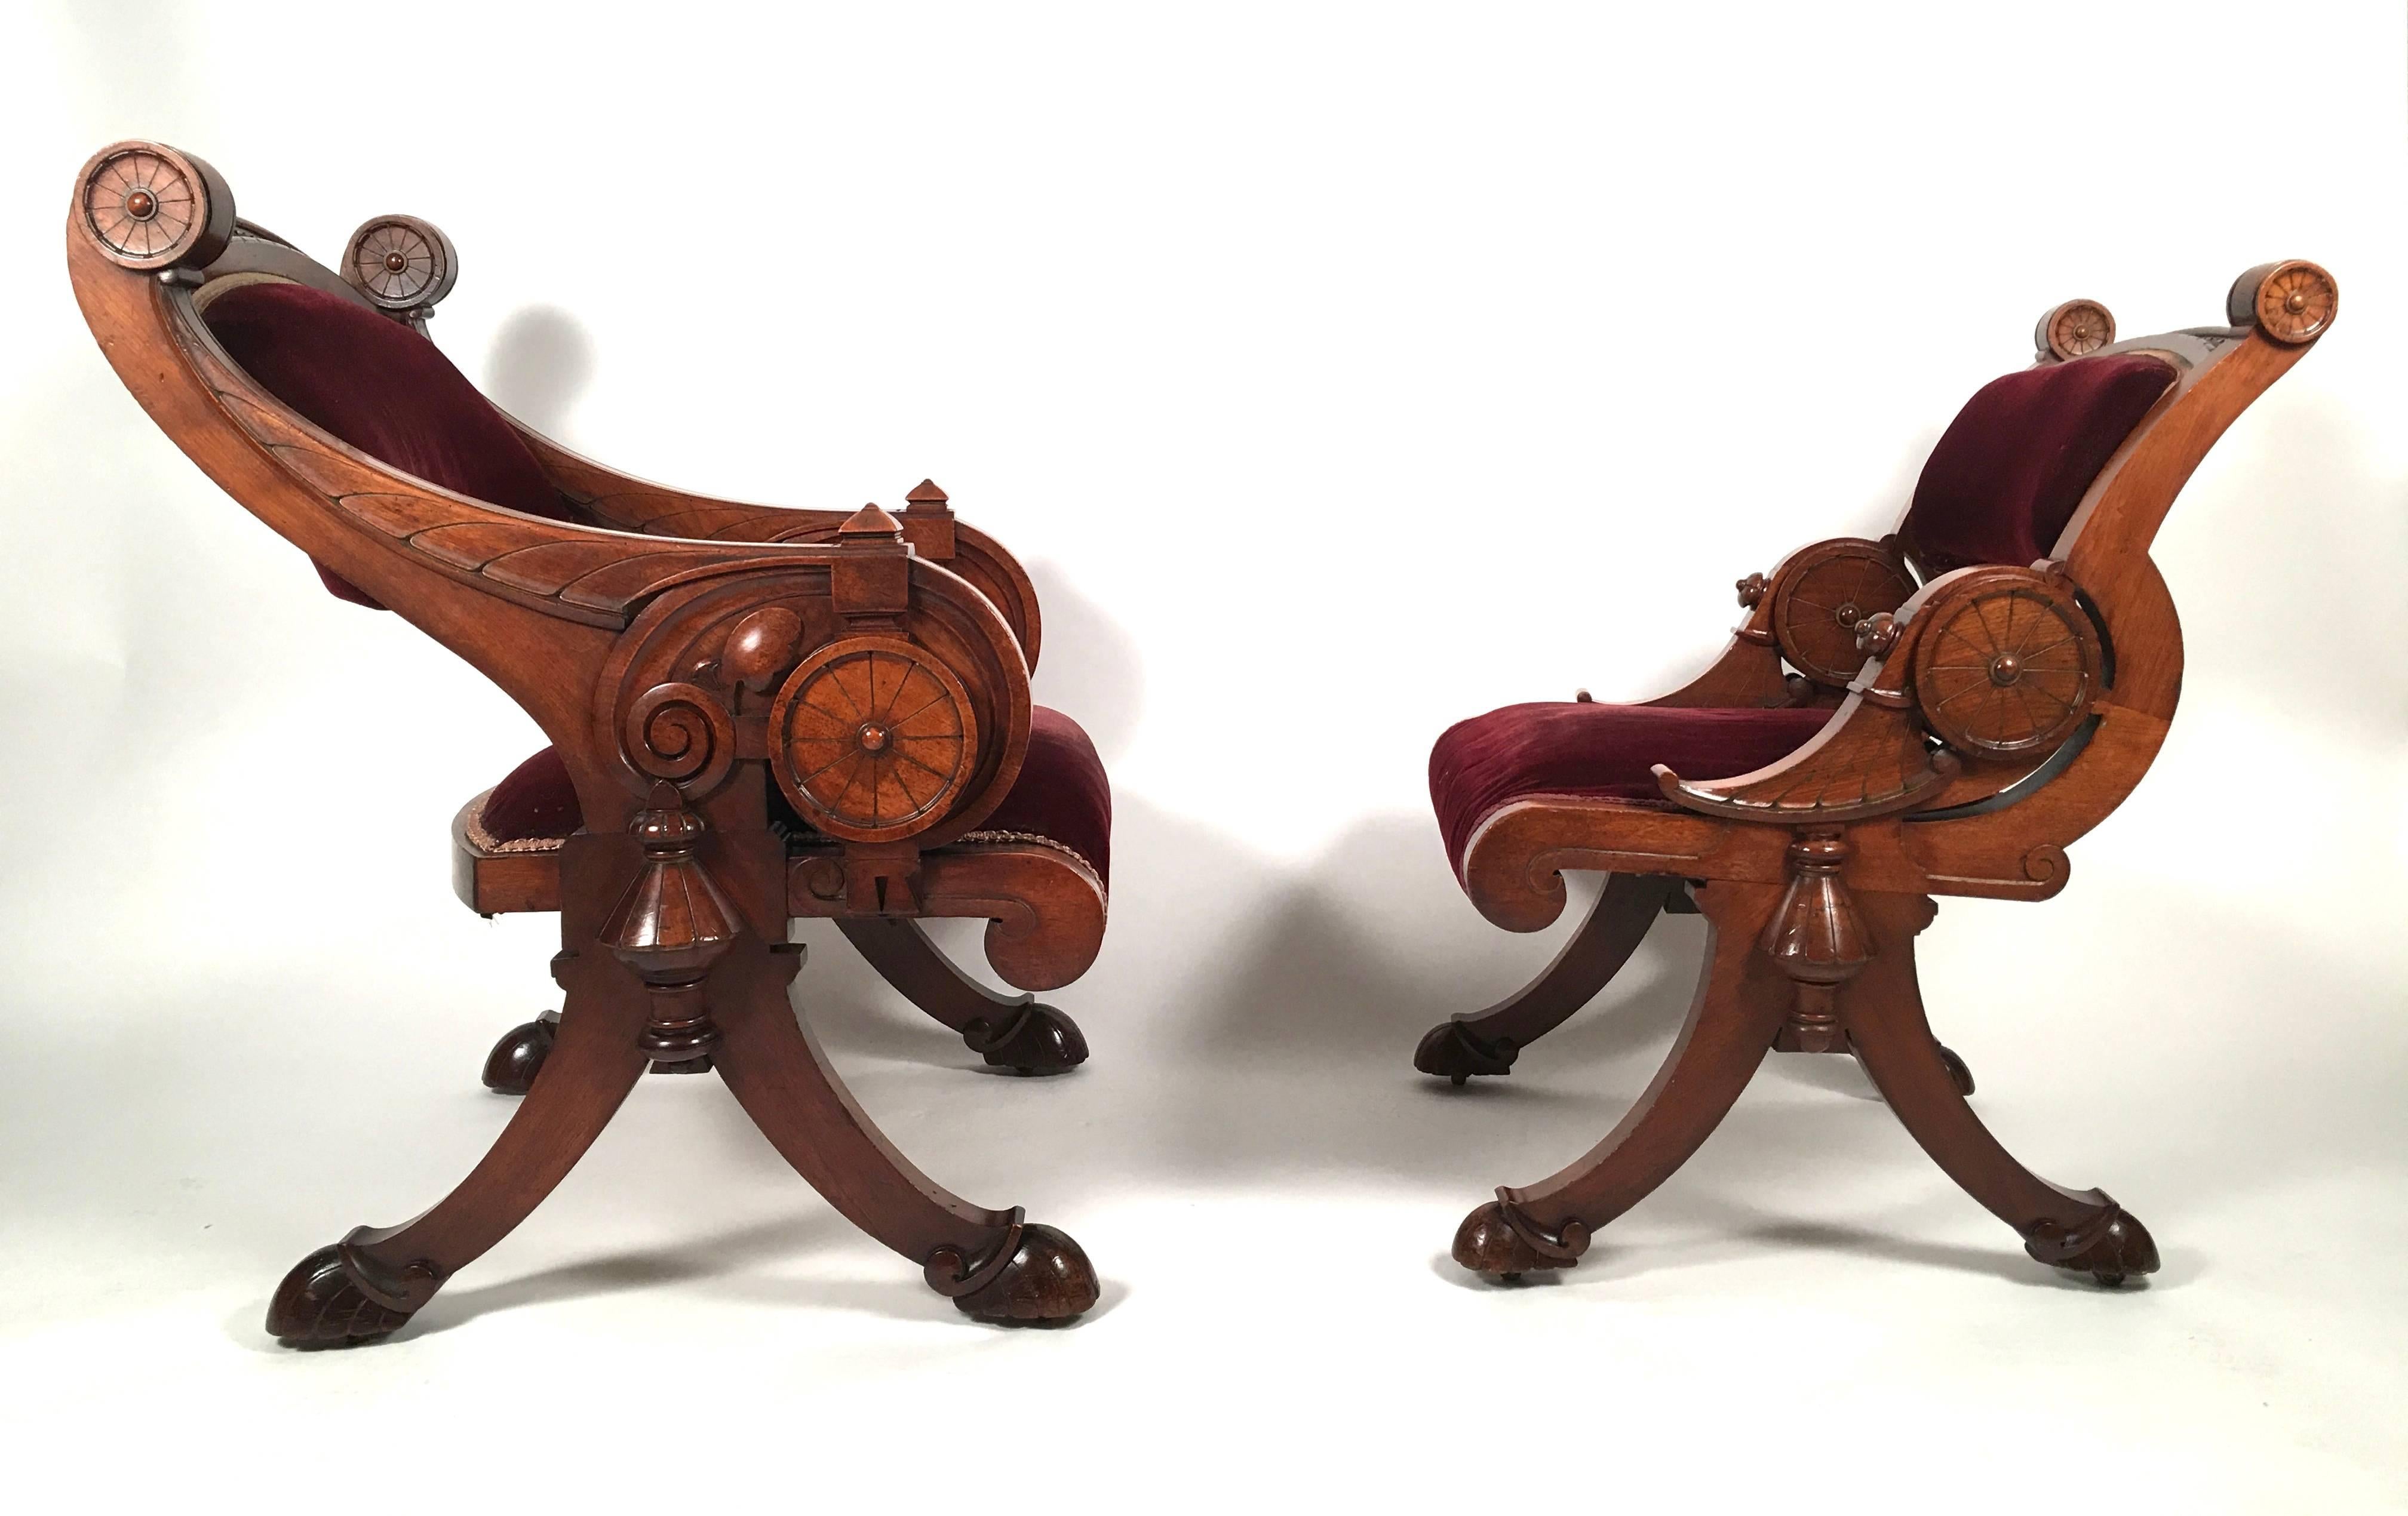 A beautifully made suite of American Renaissance Revival carved walnut furniture, comprising 2 arm chairs, one larger than the other, for gentleman and lady, and a matching foot stool which opens for storage. These sculptural chairs exhibit